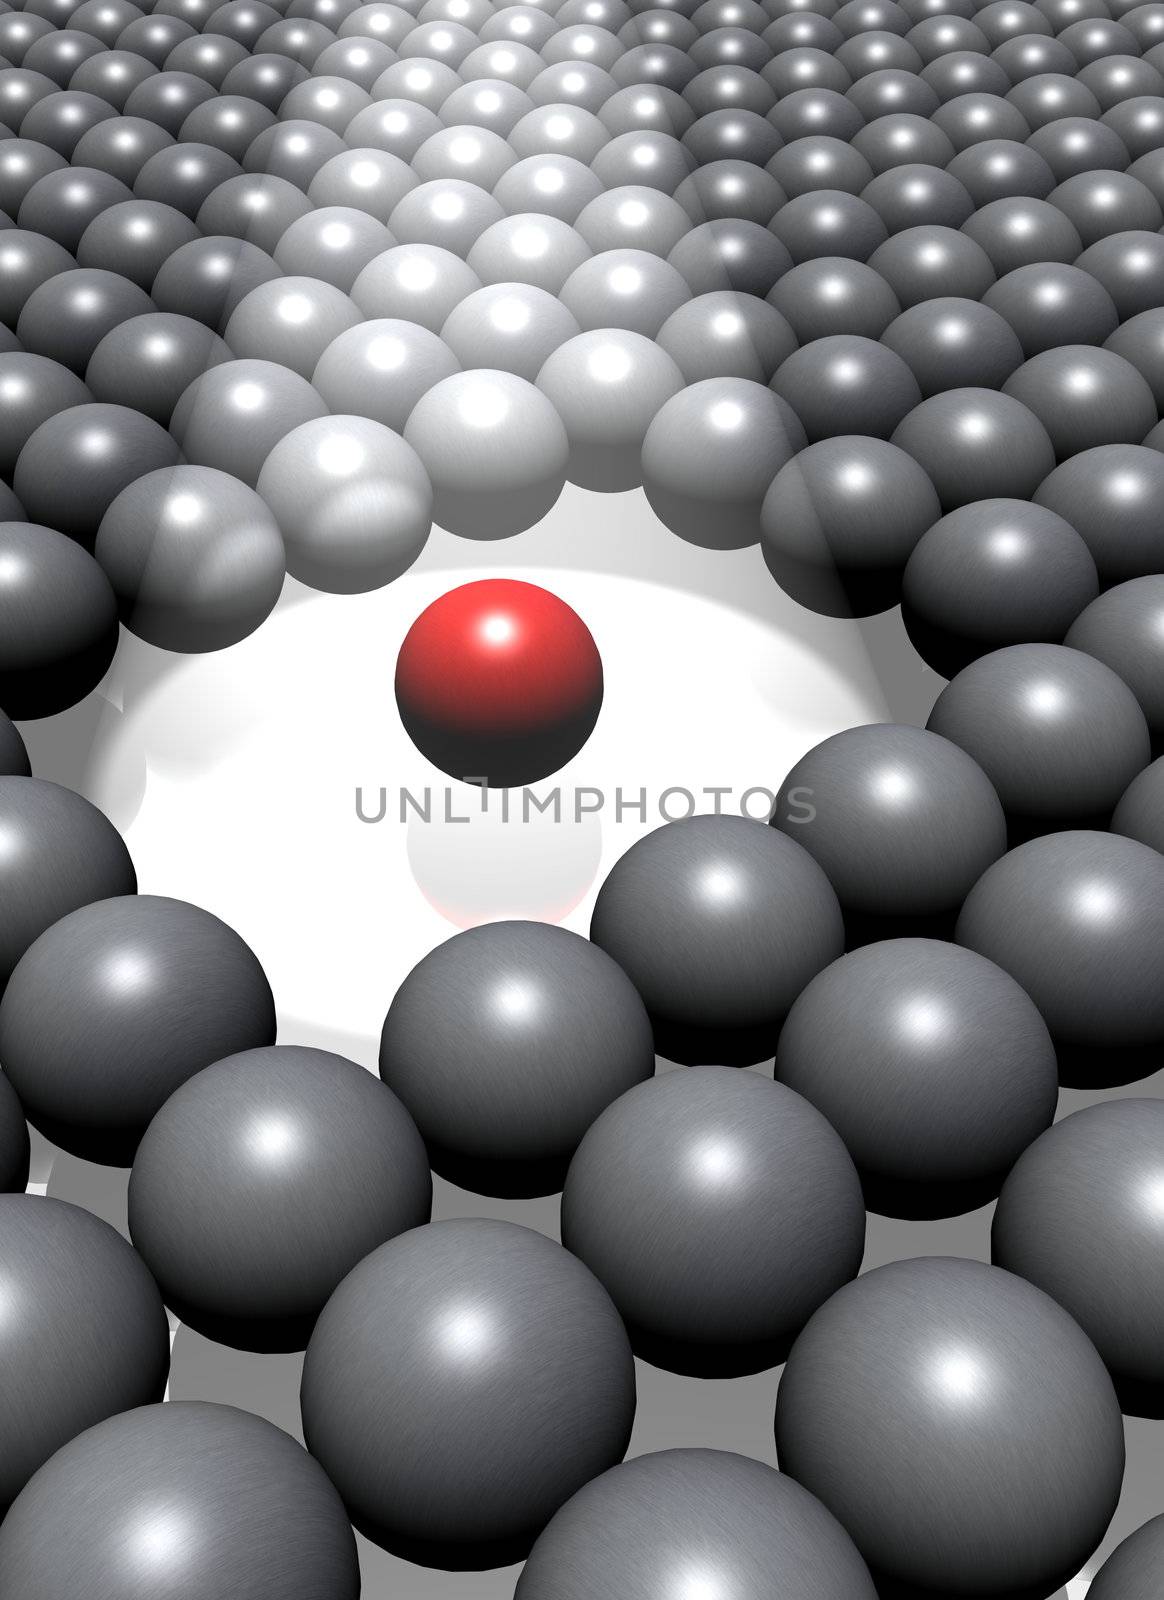 A single highighted red ball among a crowd of grey balls.